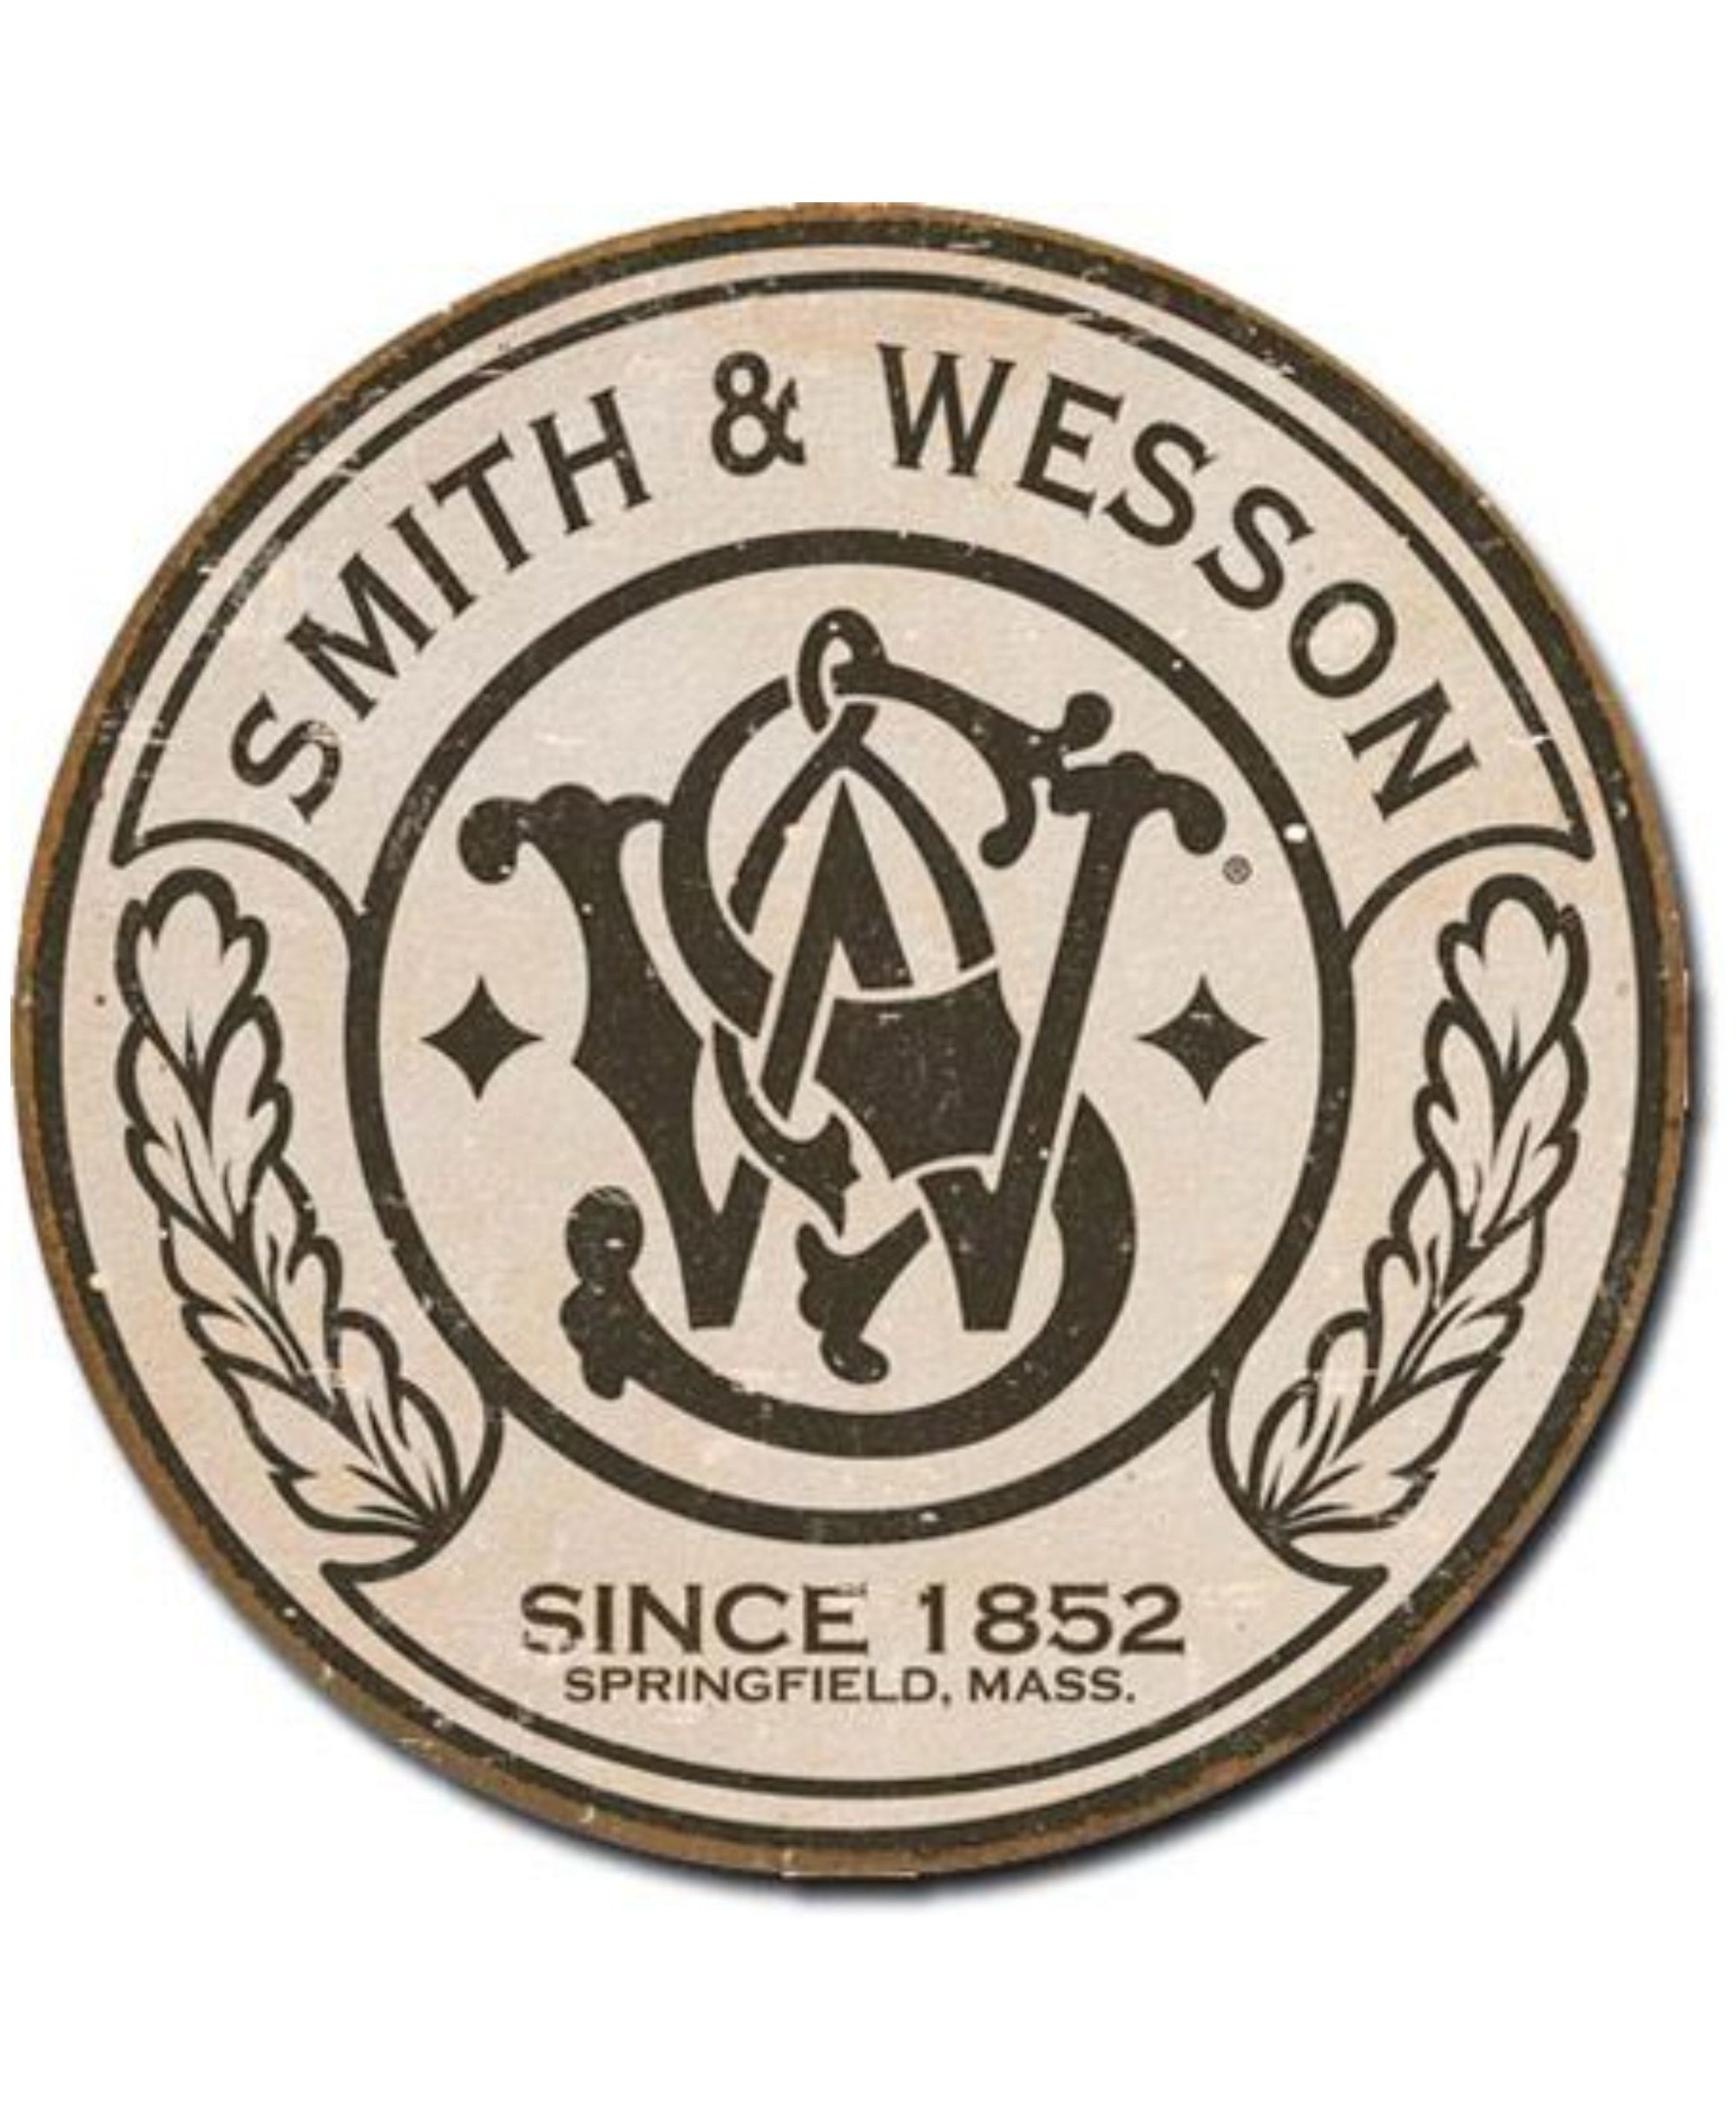 Smith & Wesson Tin Sign | Grit Gear Apparel®